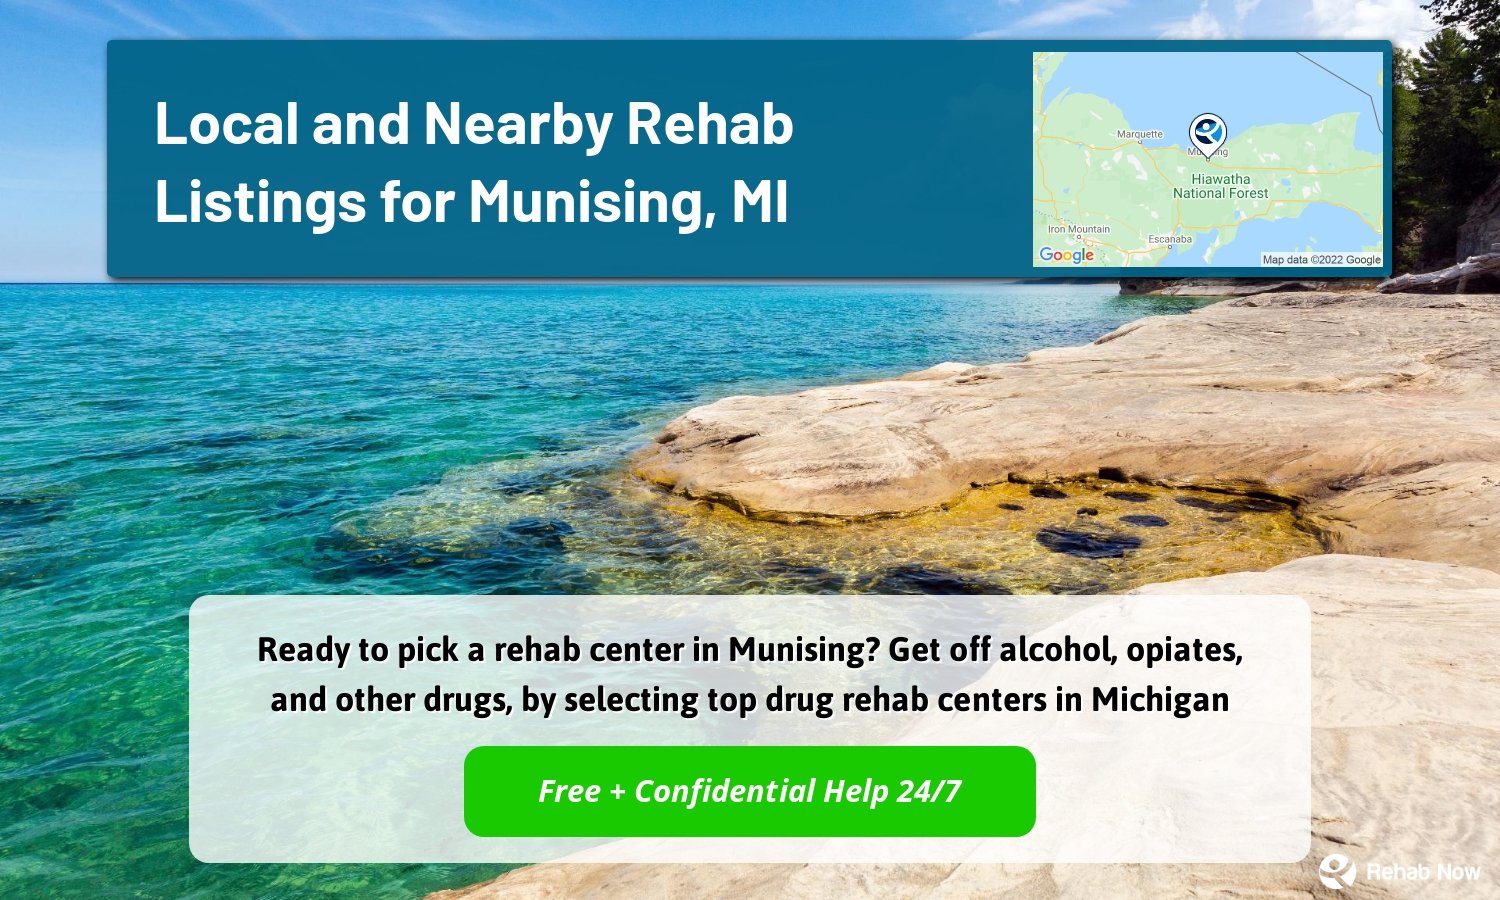 Ready to pick a rehab center in Munising? Get off alcohol, opiates, and other drugs, by selecting top drug rehab centers in Michigan